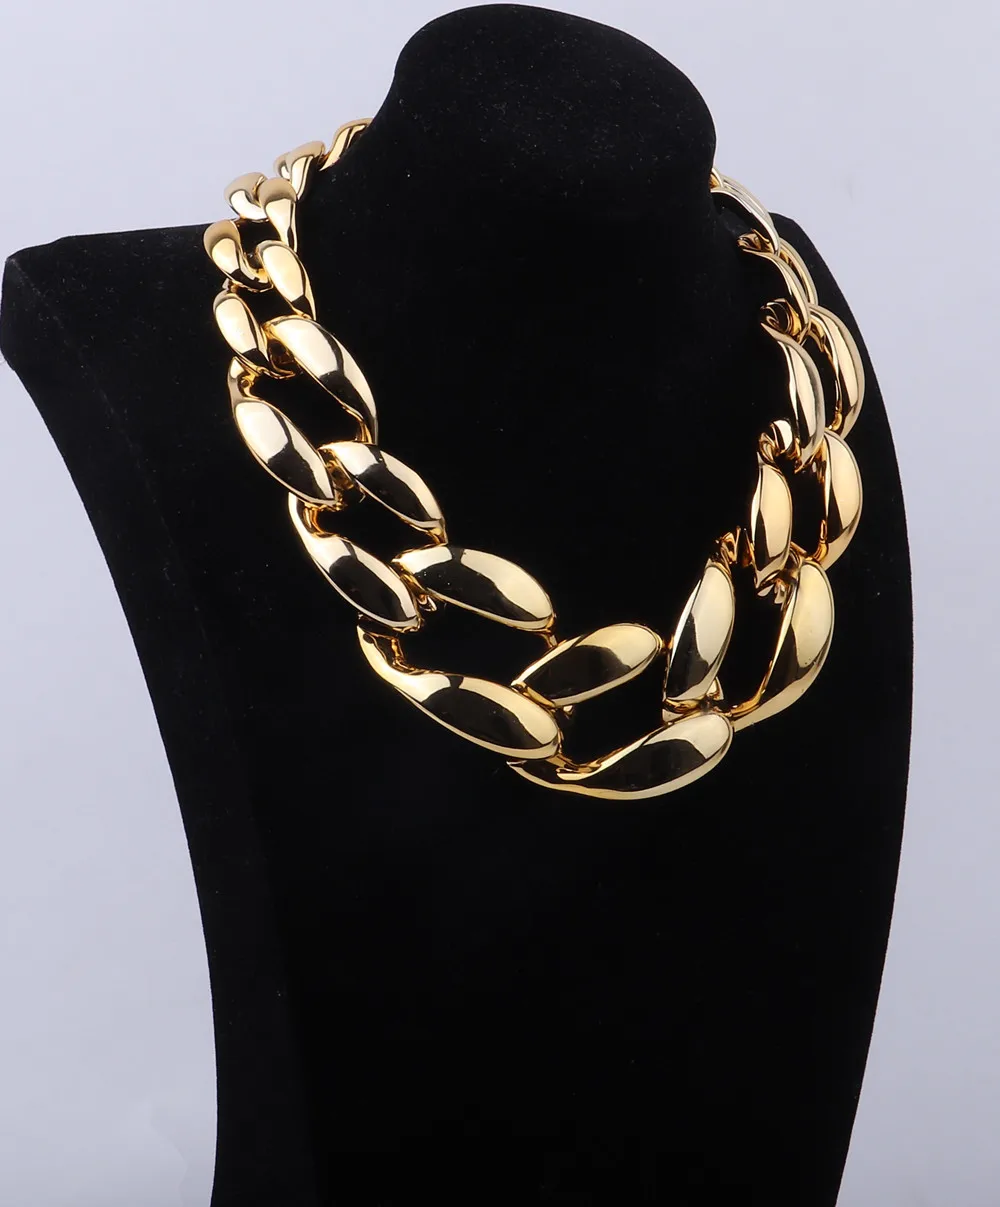 Chunky Chain Necklace Acrylic Link Necklace Long Chain -   Chunky  chain necklaces, Fashion necklace, Black necklace statement